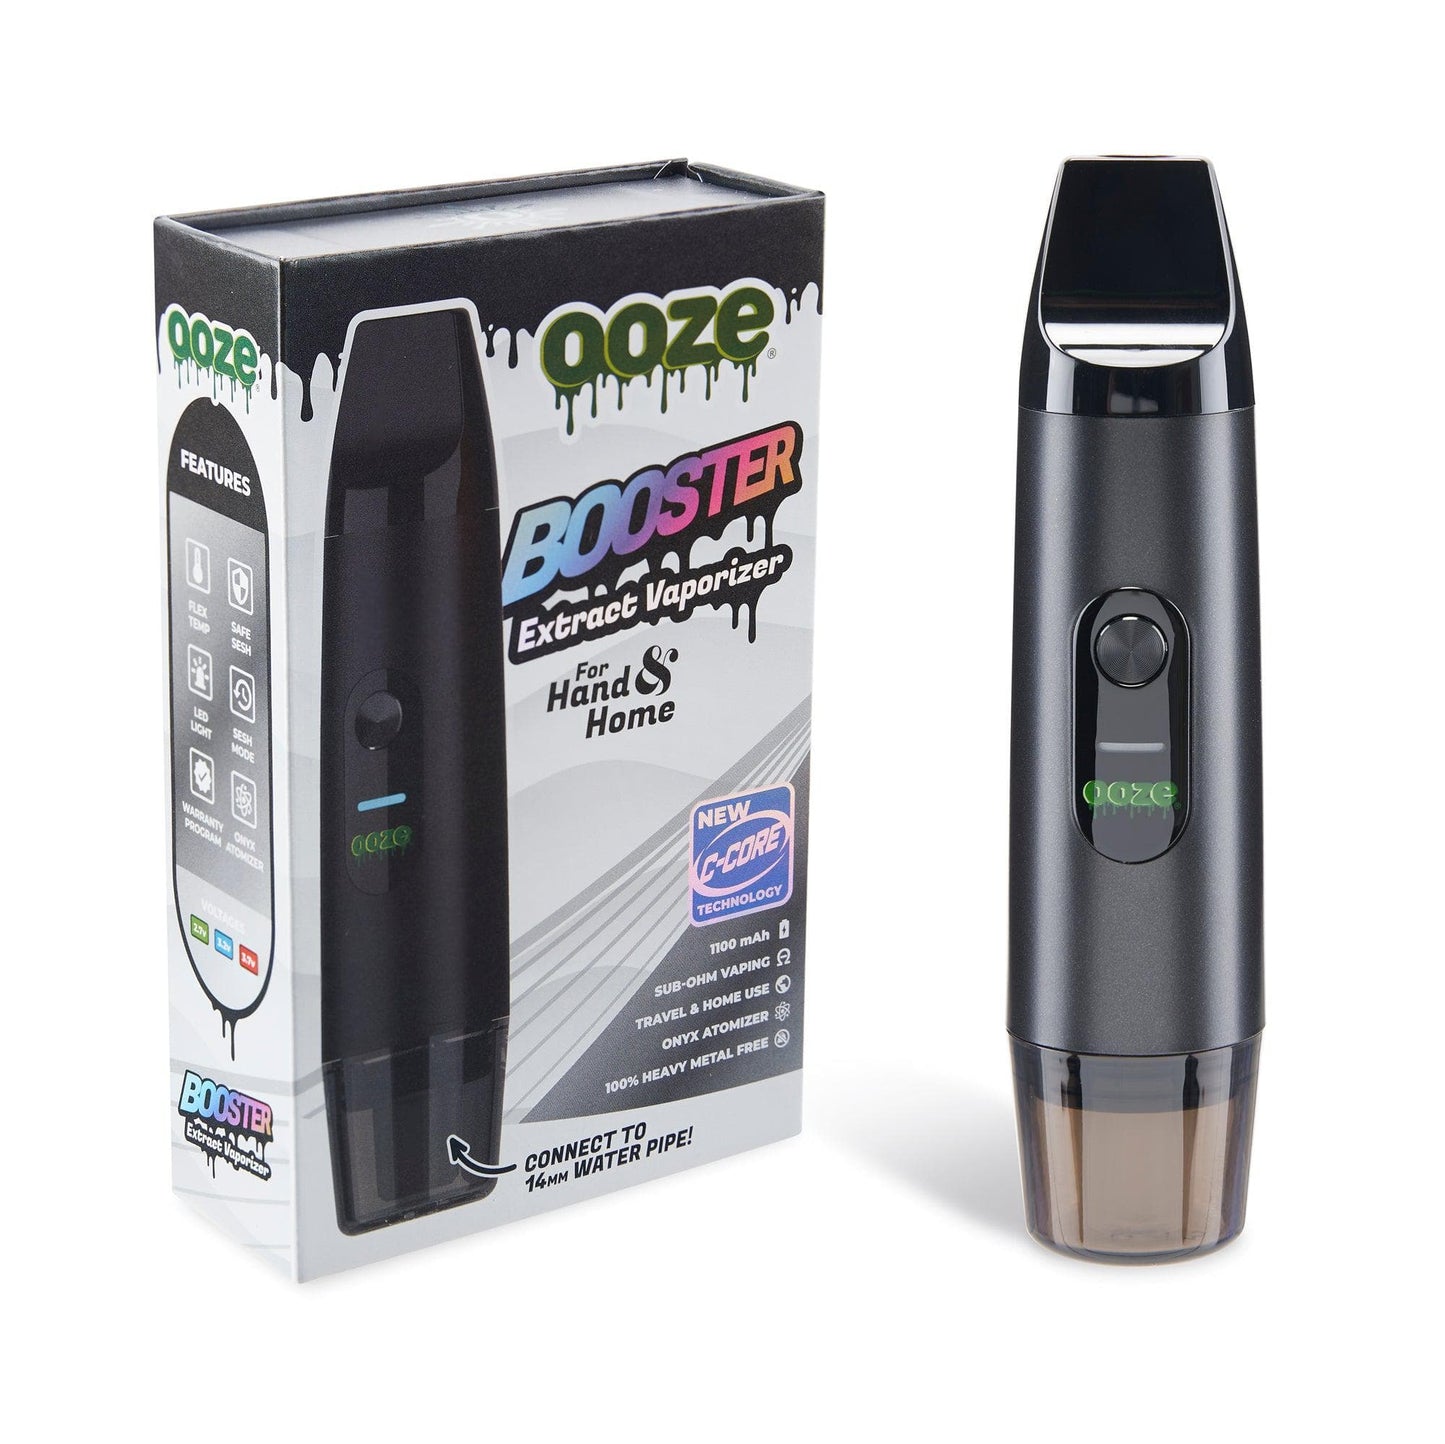 Ooze Batteries and Vapes Black Ooze Booster Extract Vaporizer – C-Core 1100 mAh